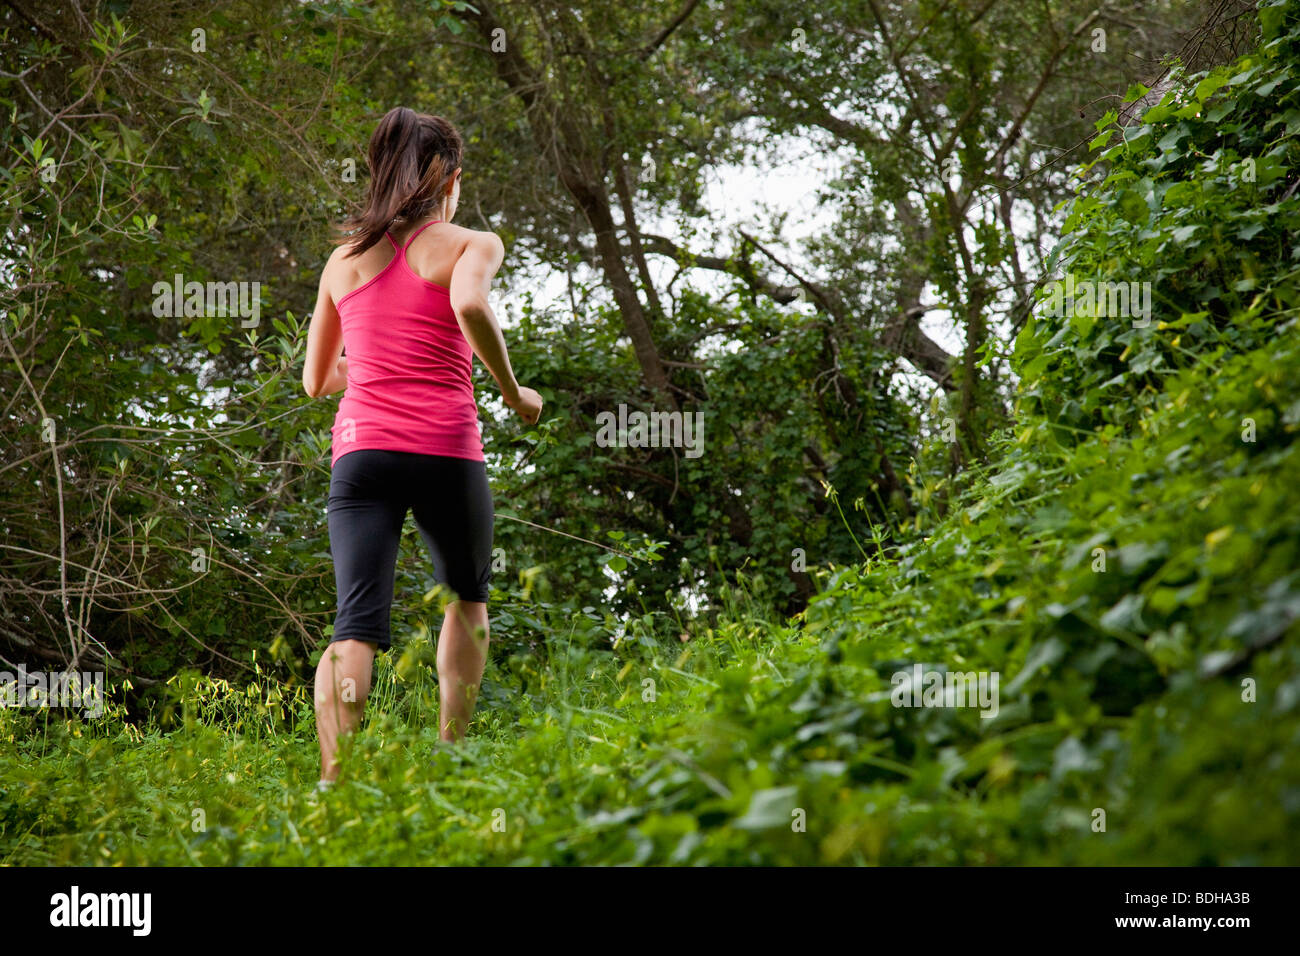 Woman trail running through a green meadow in the woods. Stock Photo